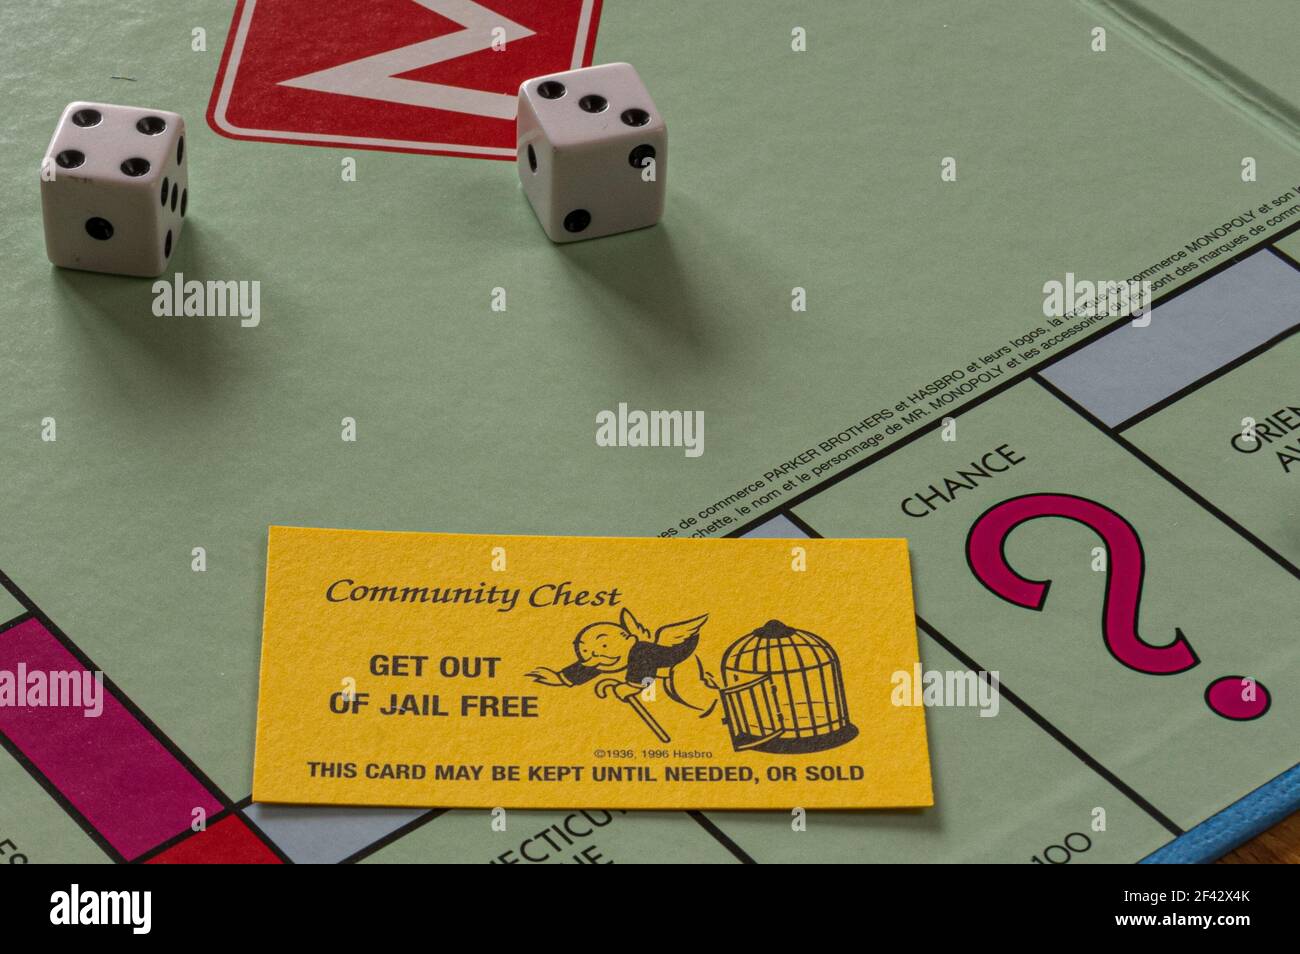 Monopoly board showing Get Out of Jail Free card along with dice Stock Photo